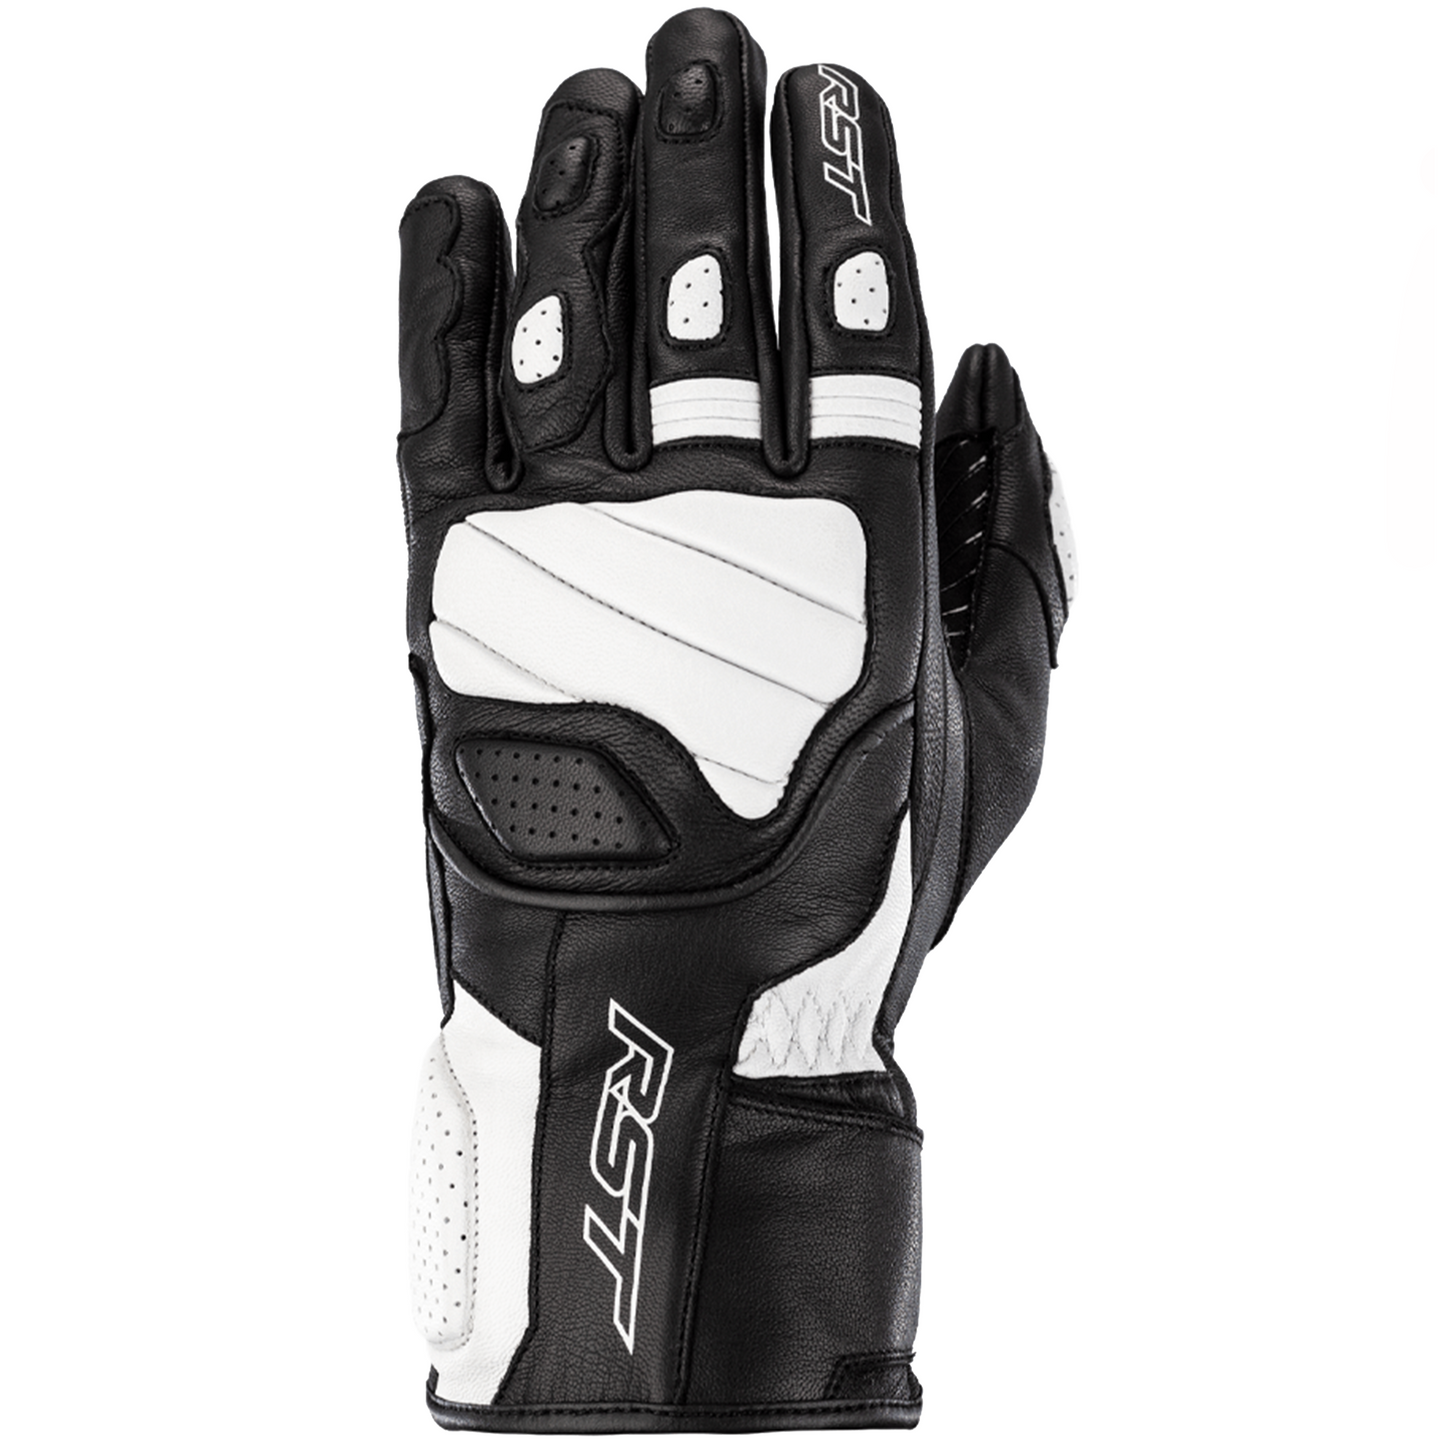 RST Turbine Leather Riding Gloves - CE APPROVED - White